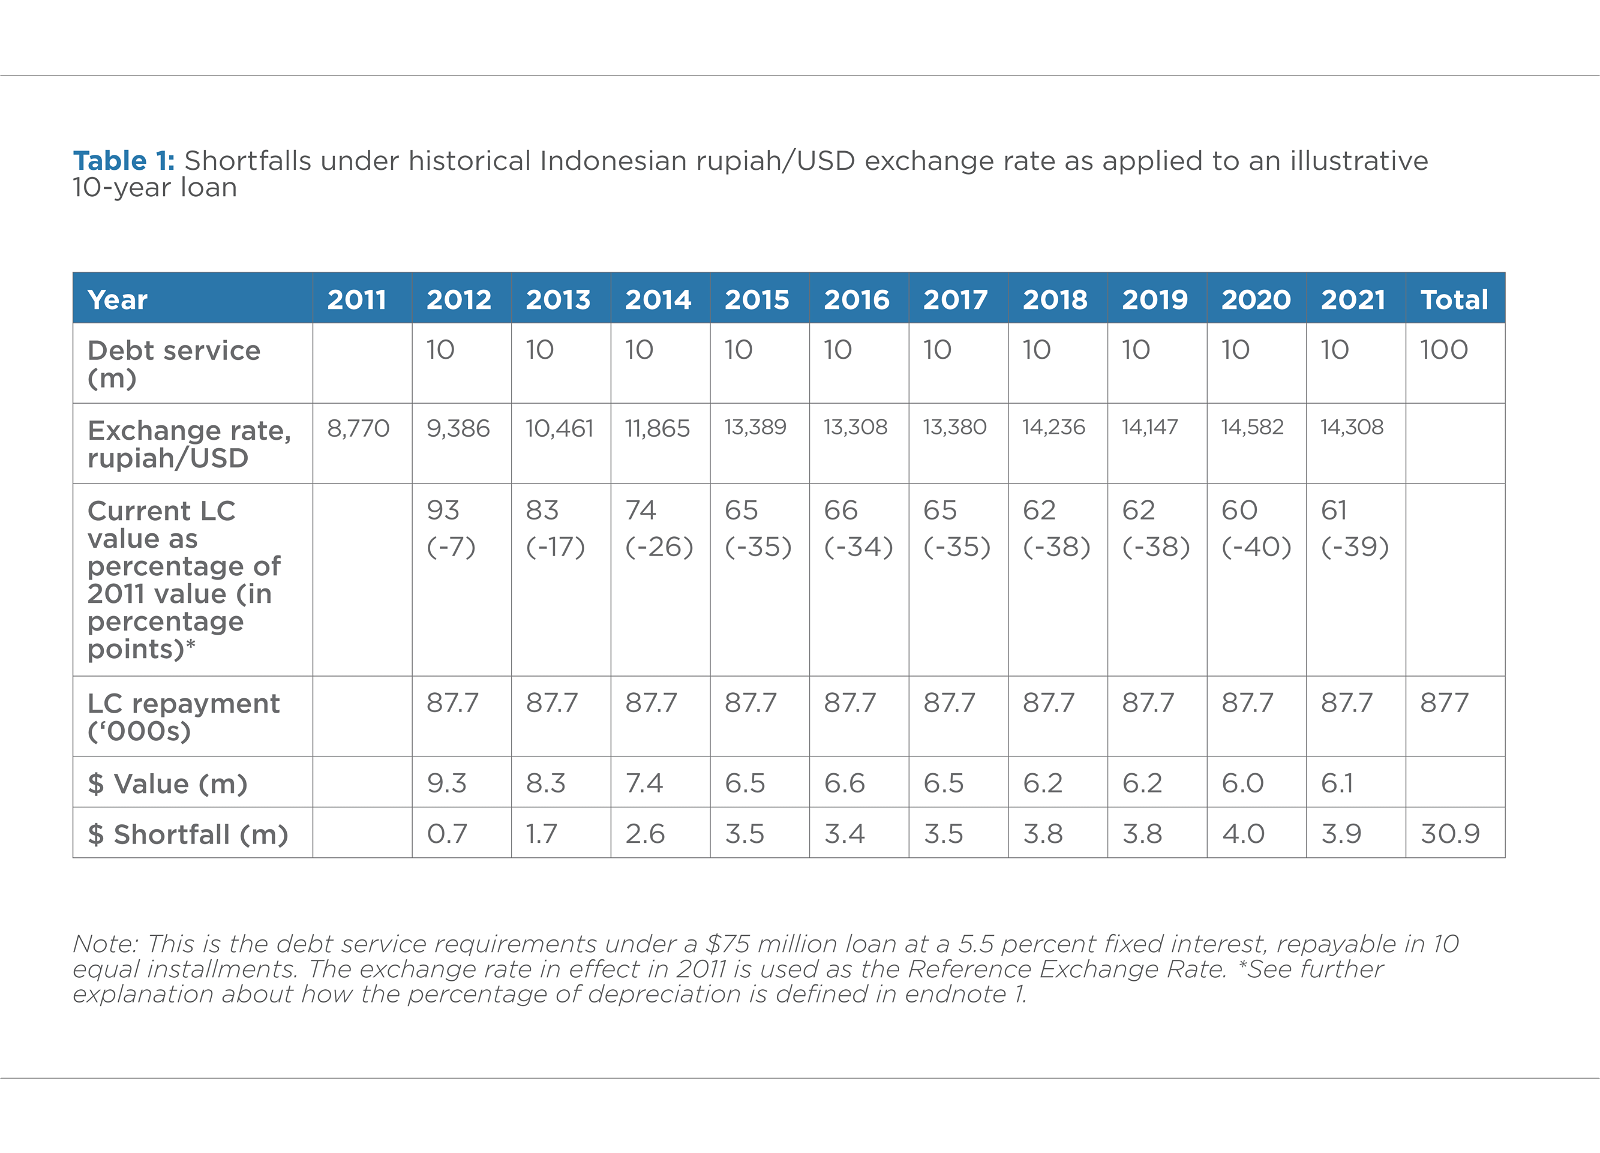 Table 1: Shortfalls under historical Indonesian rupiah/USD exchange rate as applied to an illustrative 10-year loan